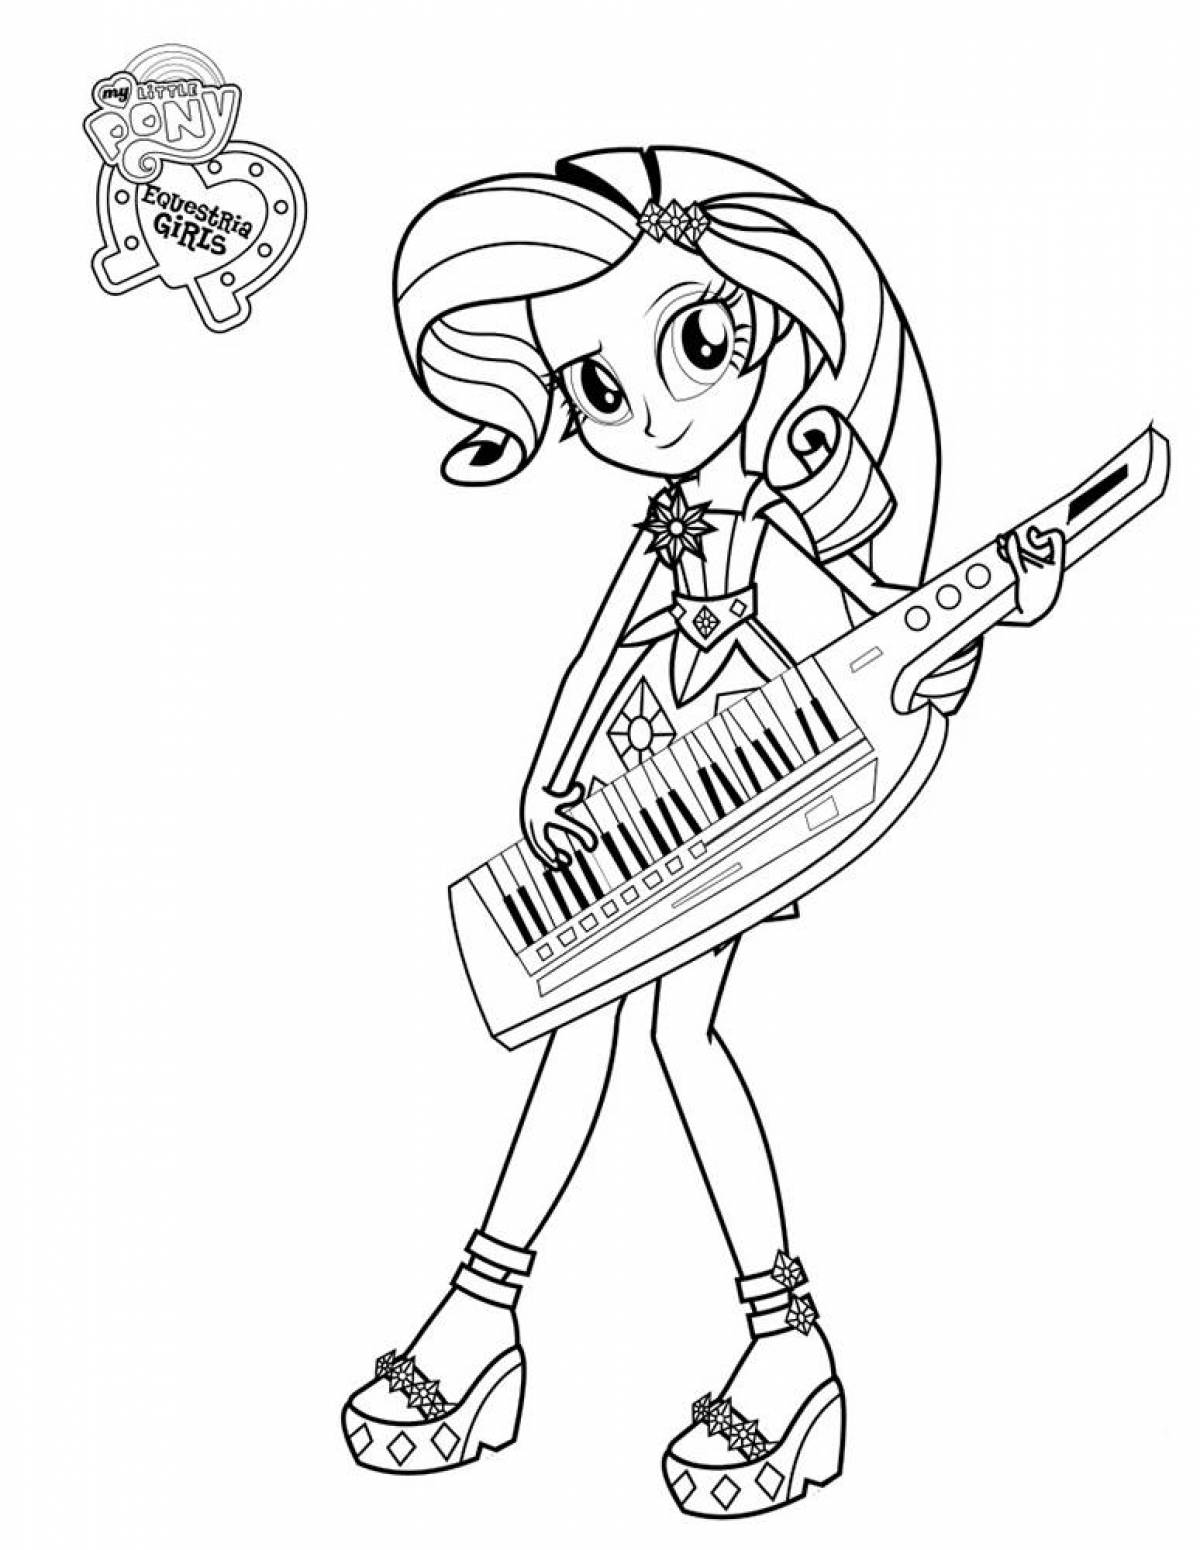 Colorful equestria girls coloring pages